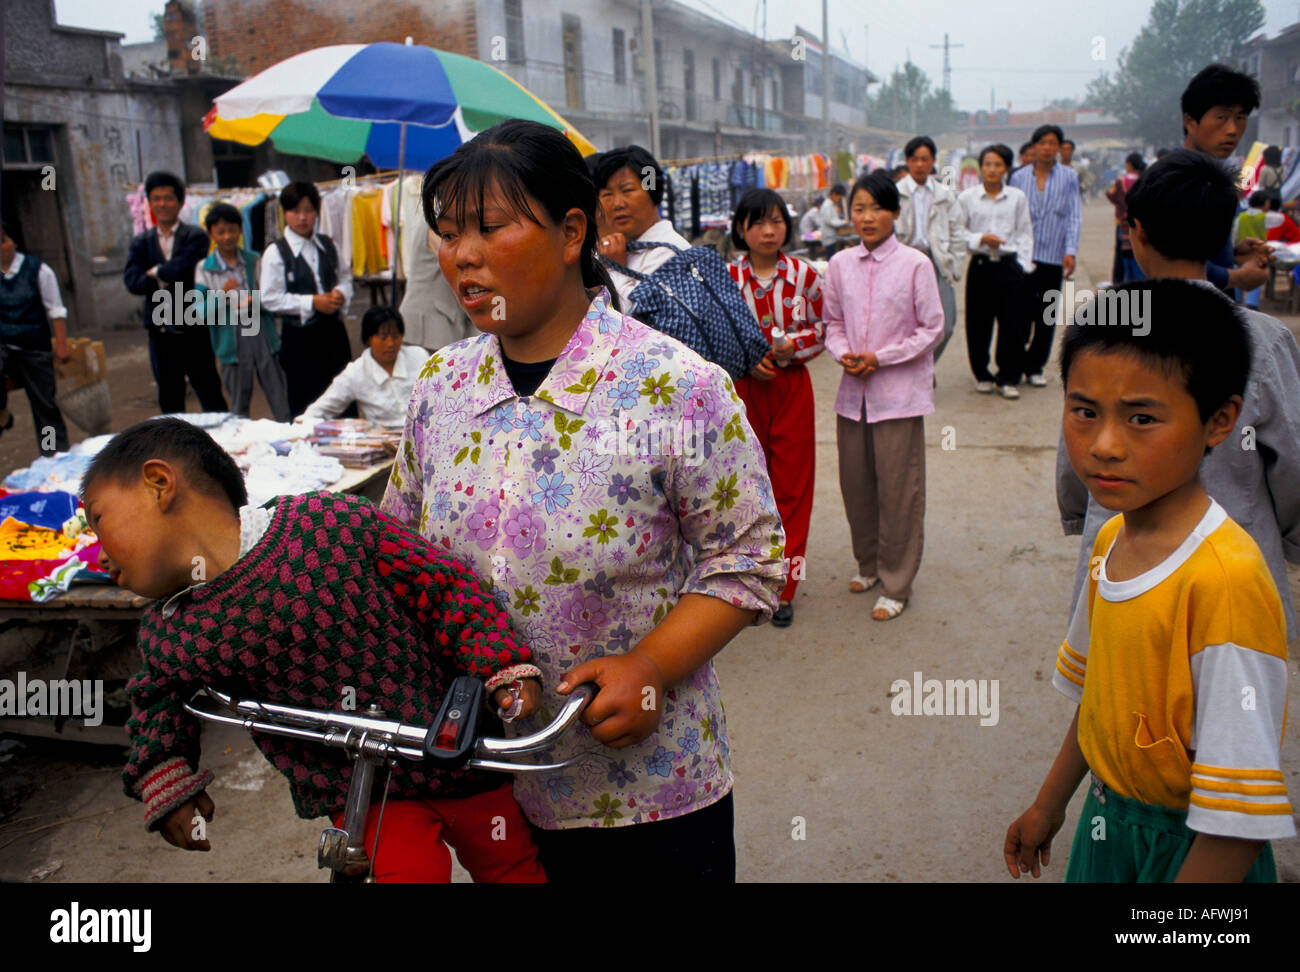 China Anhui Province 1990s 90s Mother son returning from daily market. Liufu Township, crowds of people  1998 HOMER SYKES Stock Photo